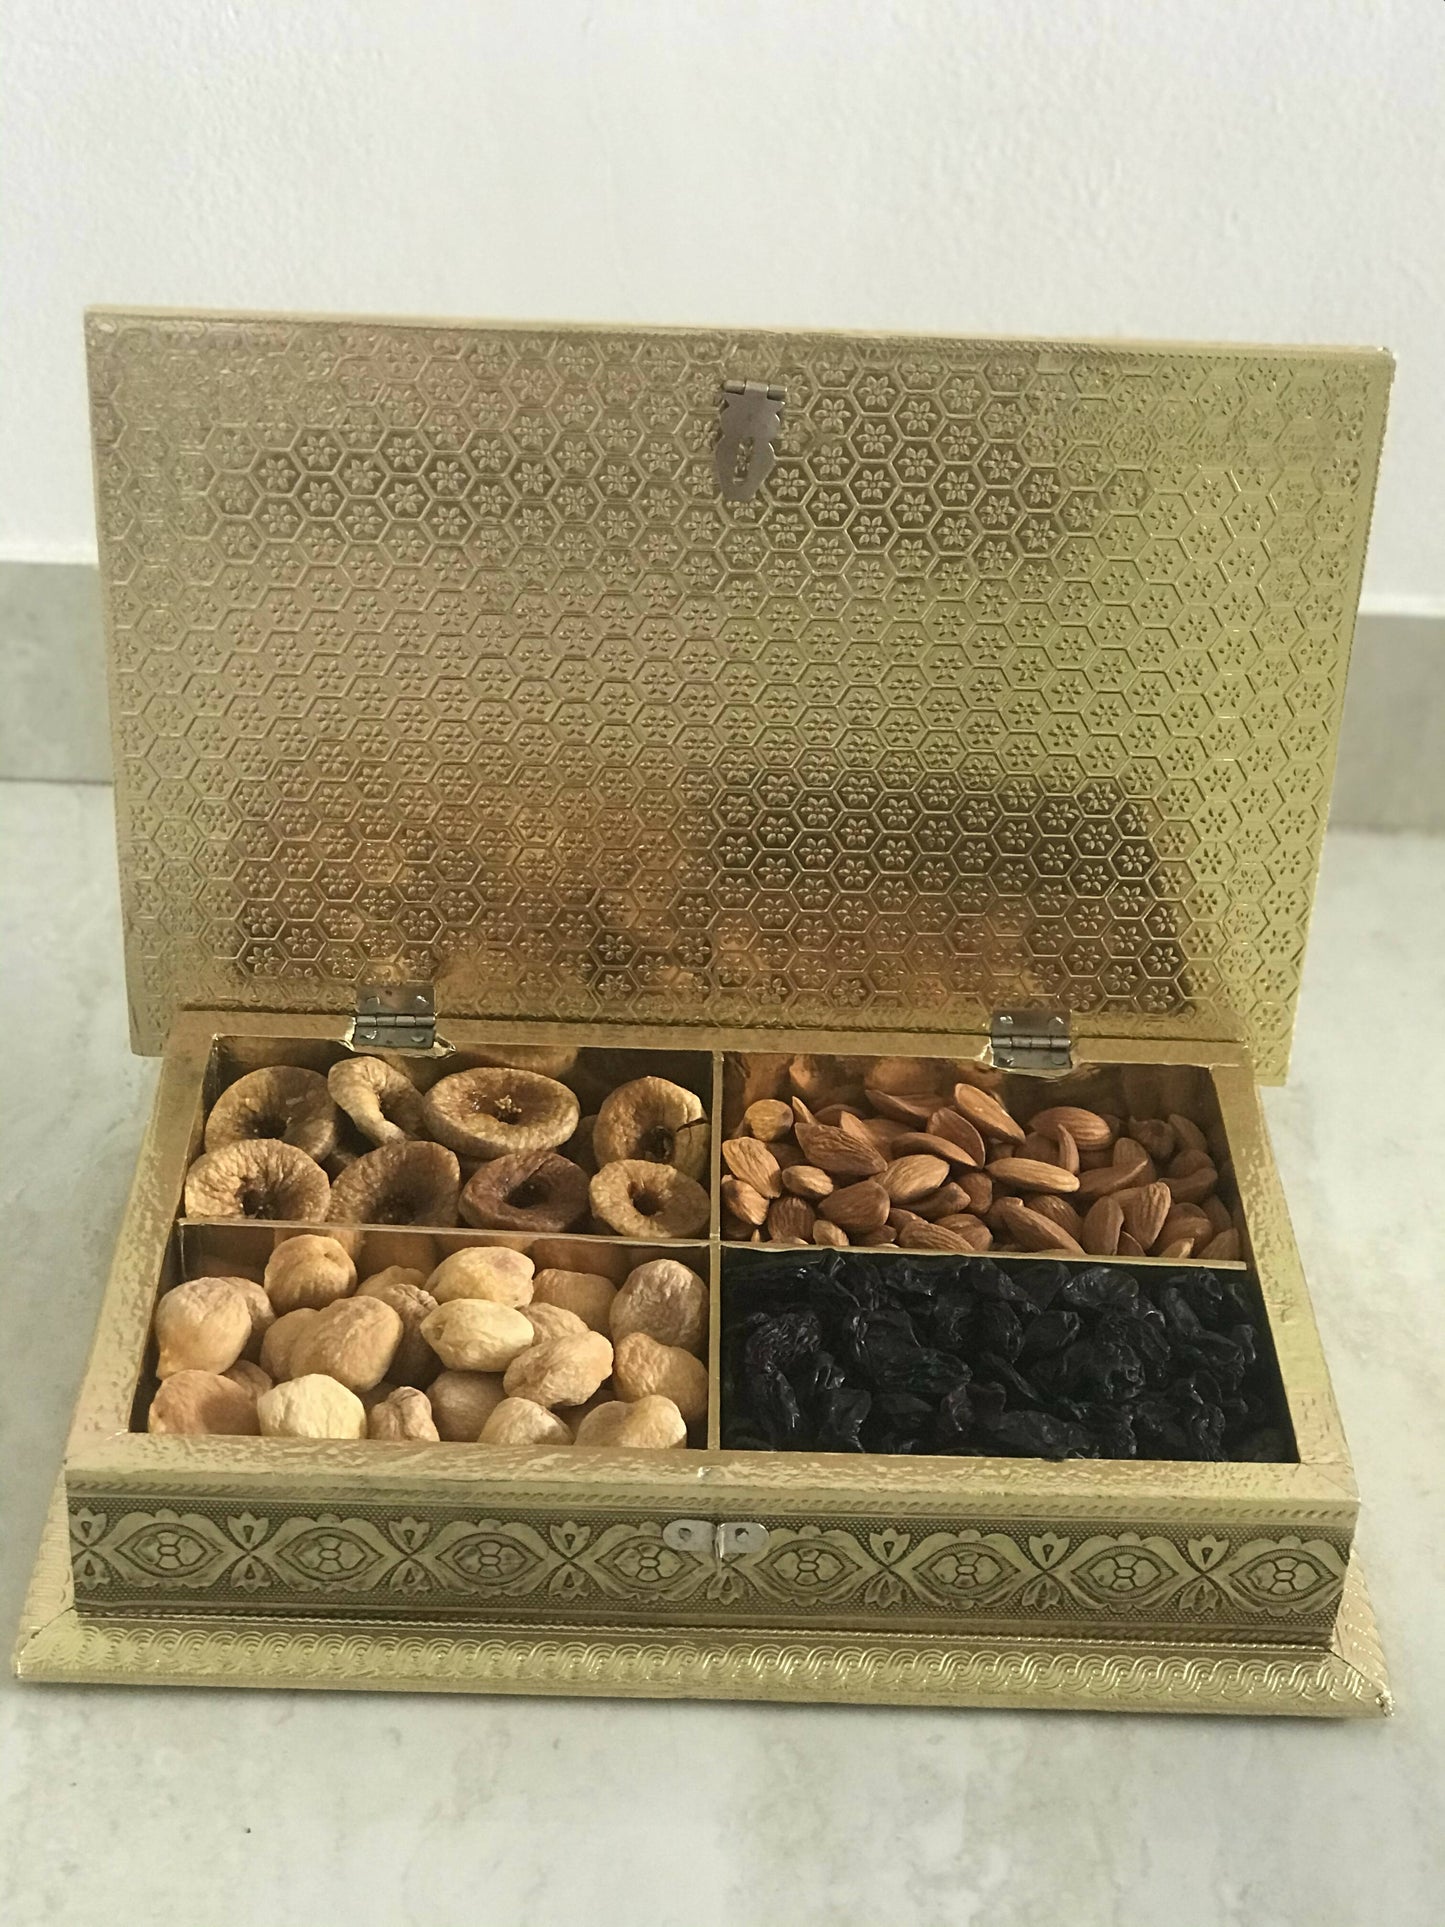 SK Mithaii | Assorted Rajasthani Elephant Design Dry Fruit Box | Almonds | Apricots | Figs | Black Resins |4 Partition